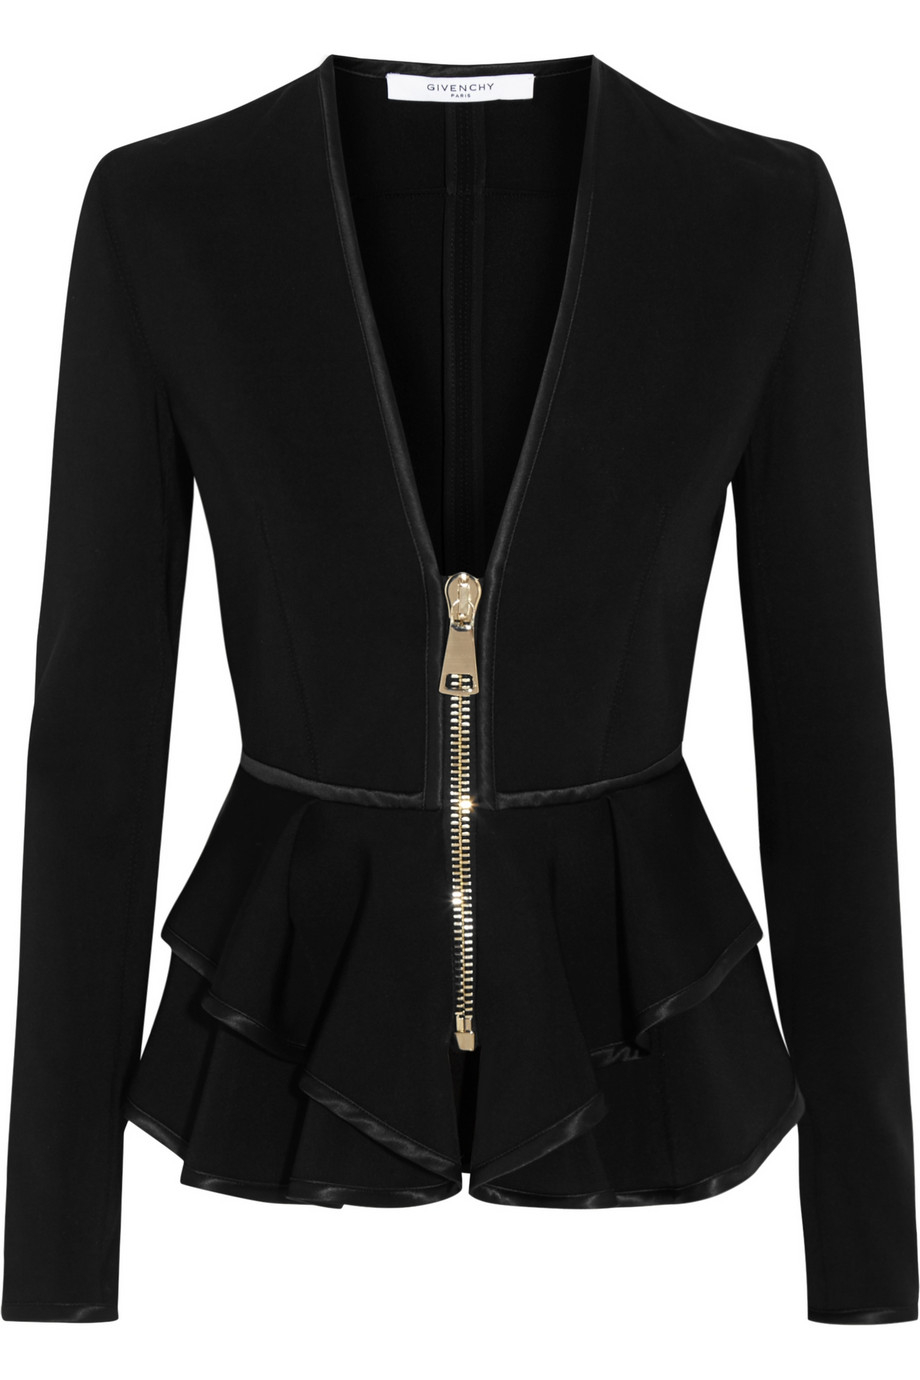 Lyst - Givenchy Ruffled Peplum Jacket In Black Stretch-Scuba Jersey in ...